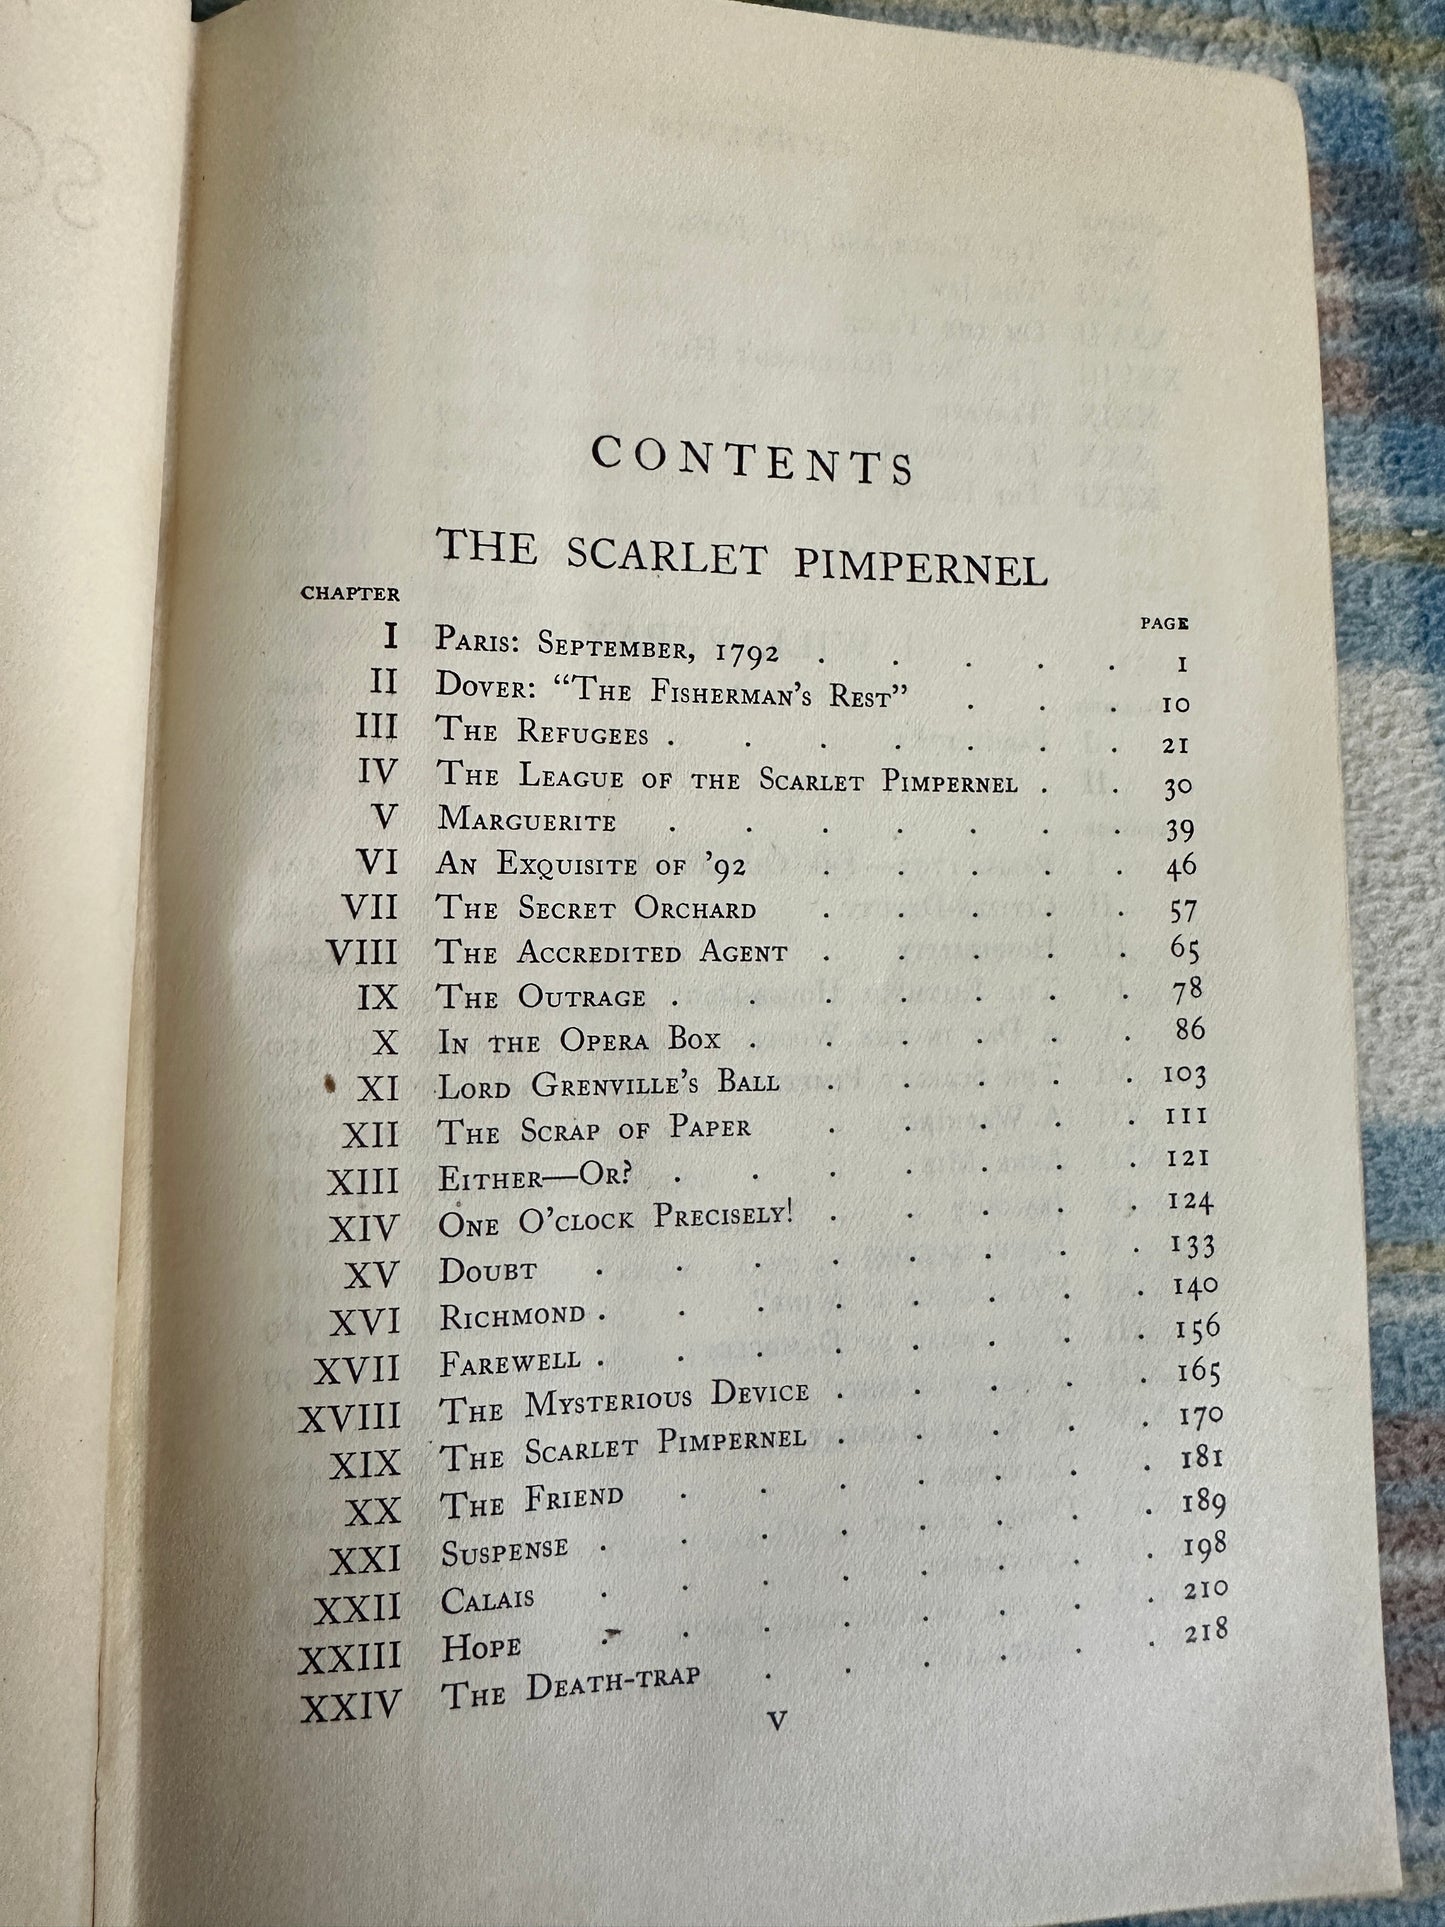 1930*1st* The Scarlet Pimpernel (4 volumes in one volume) - Baroness Orczy(Hodder & Stoughton)